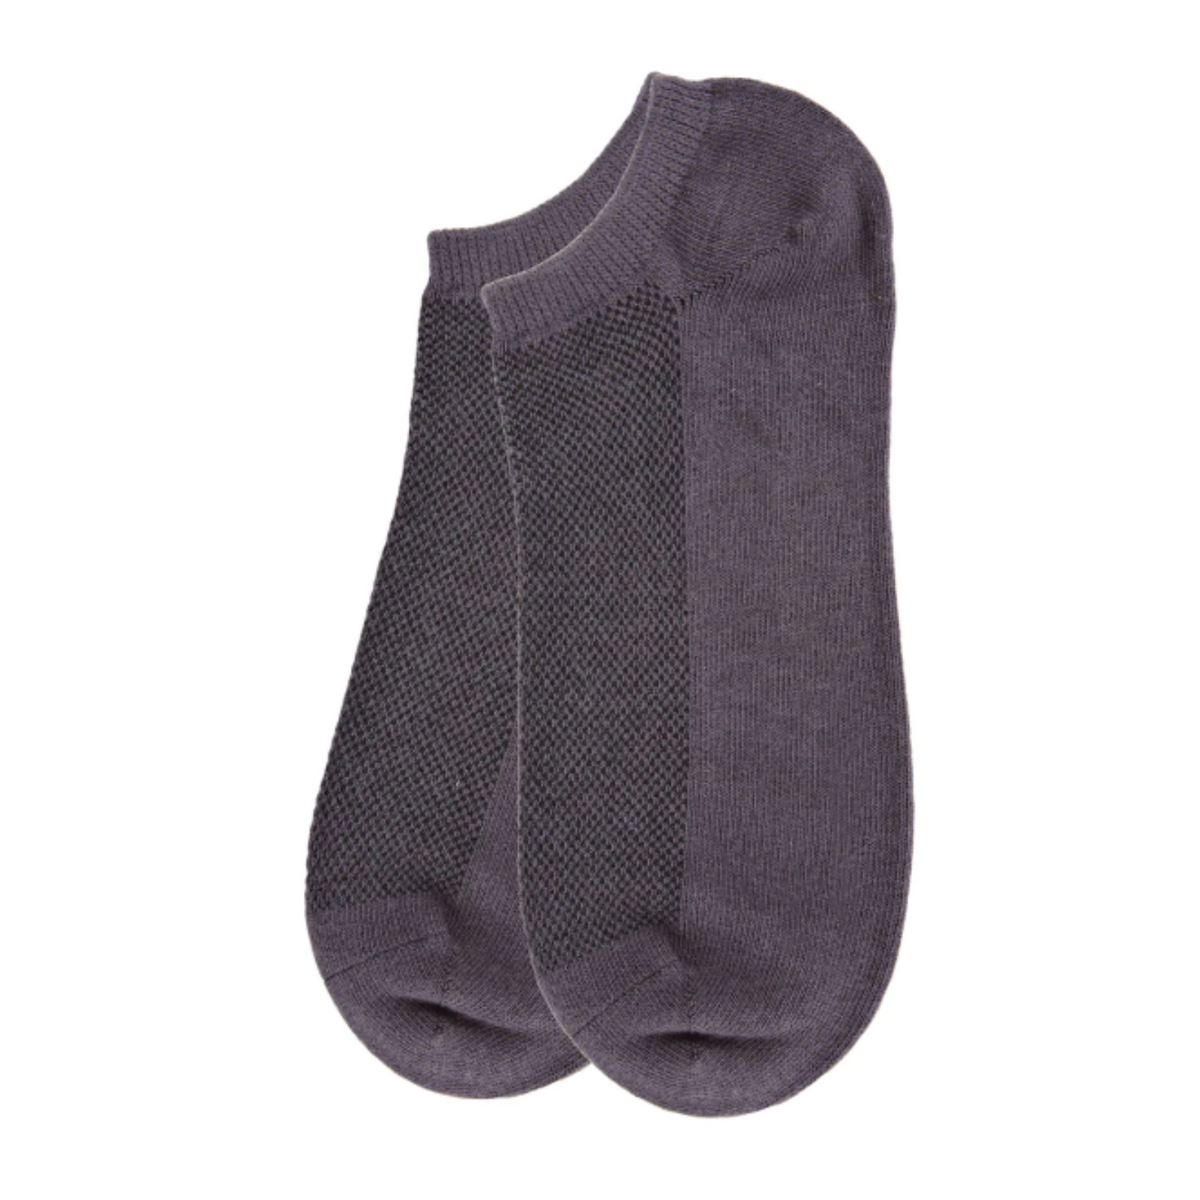 MeMoi Organic Cotton Mesh Top Breathable Liner women&#39;s sock in Earl Gray on display as a pair